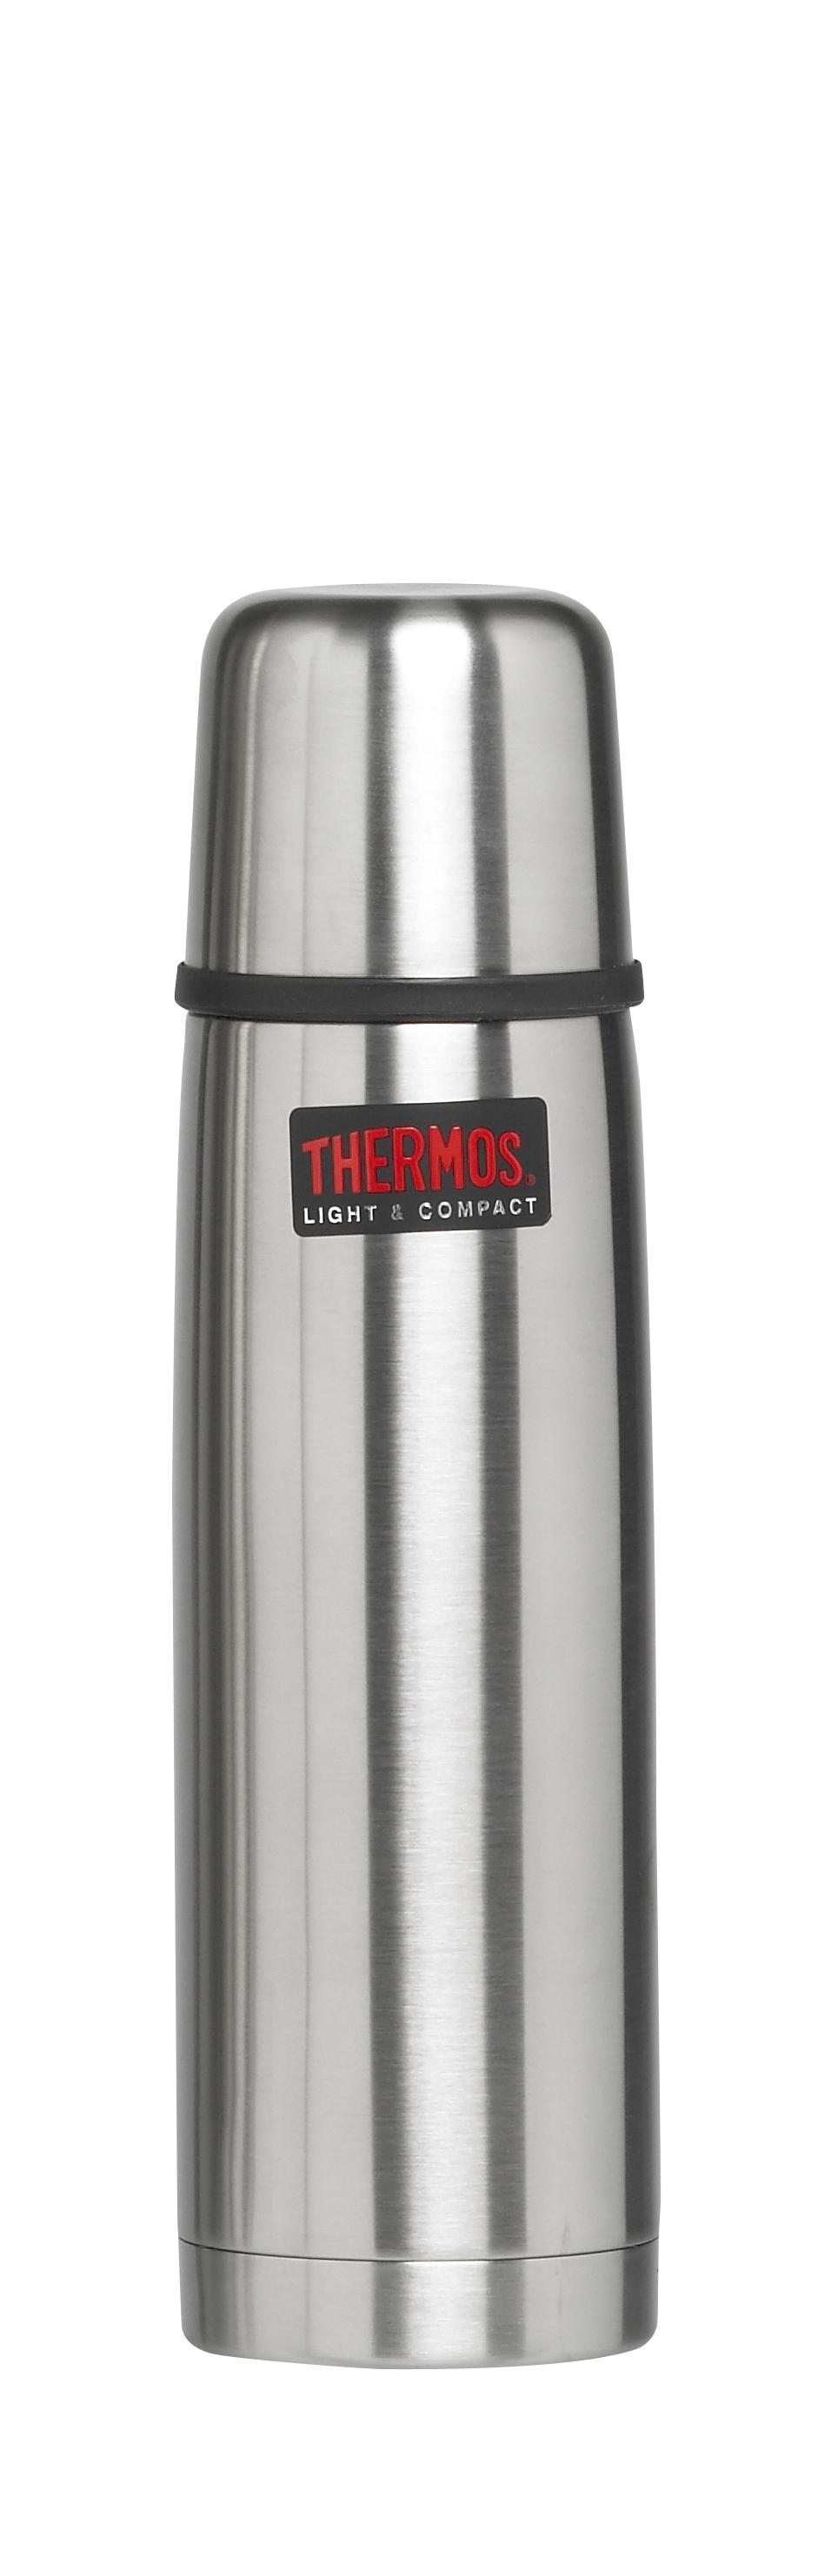 Foto Termo Thermos Light & Compact gris foto 546824